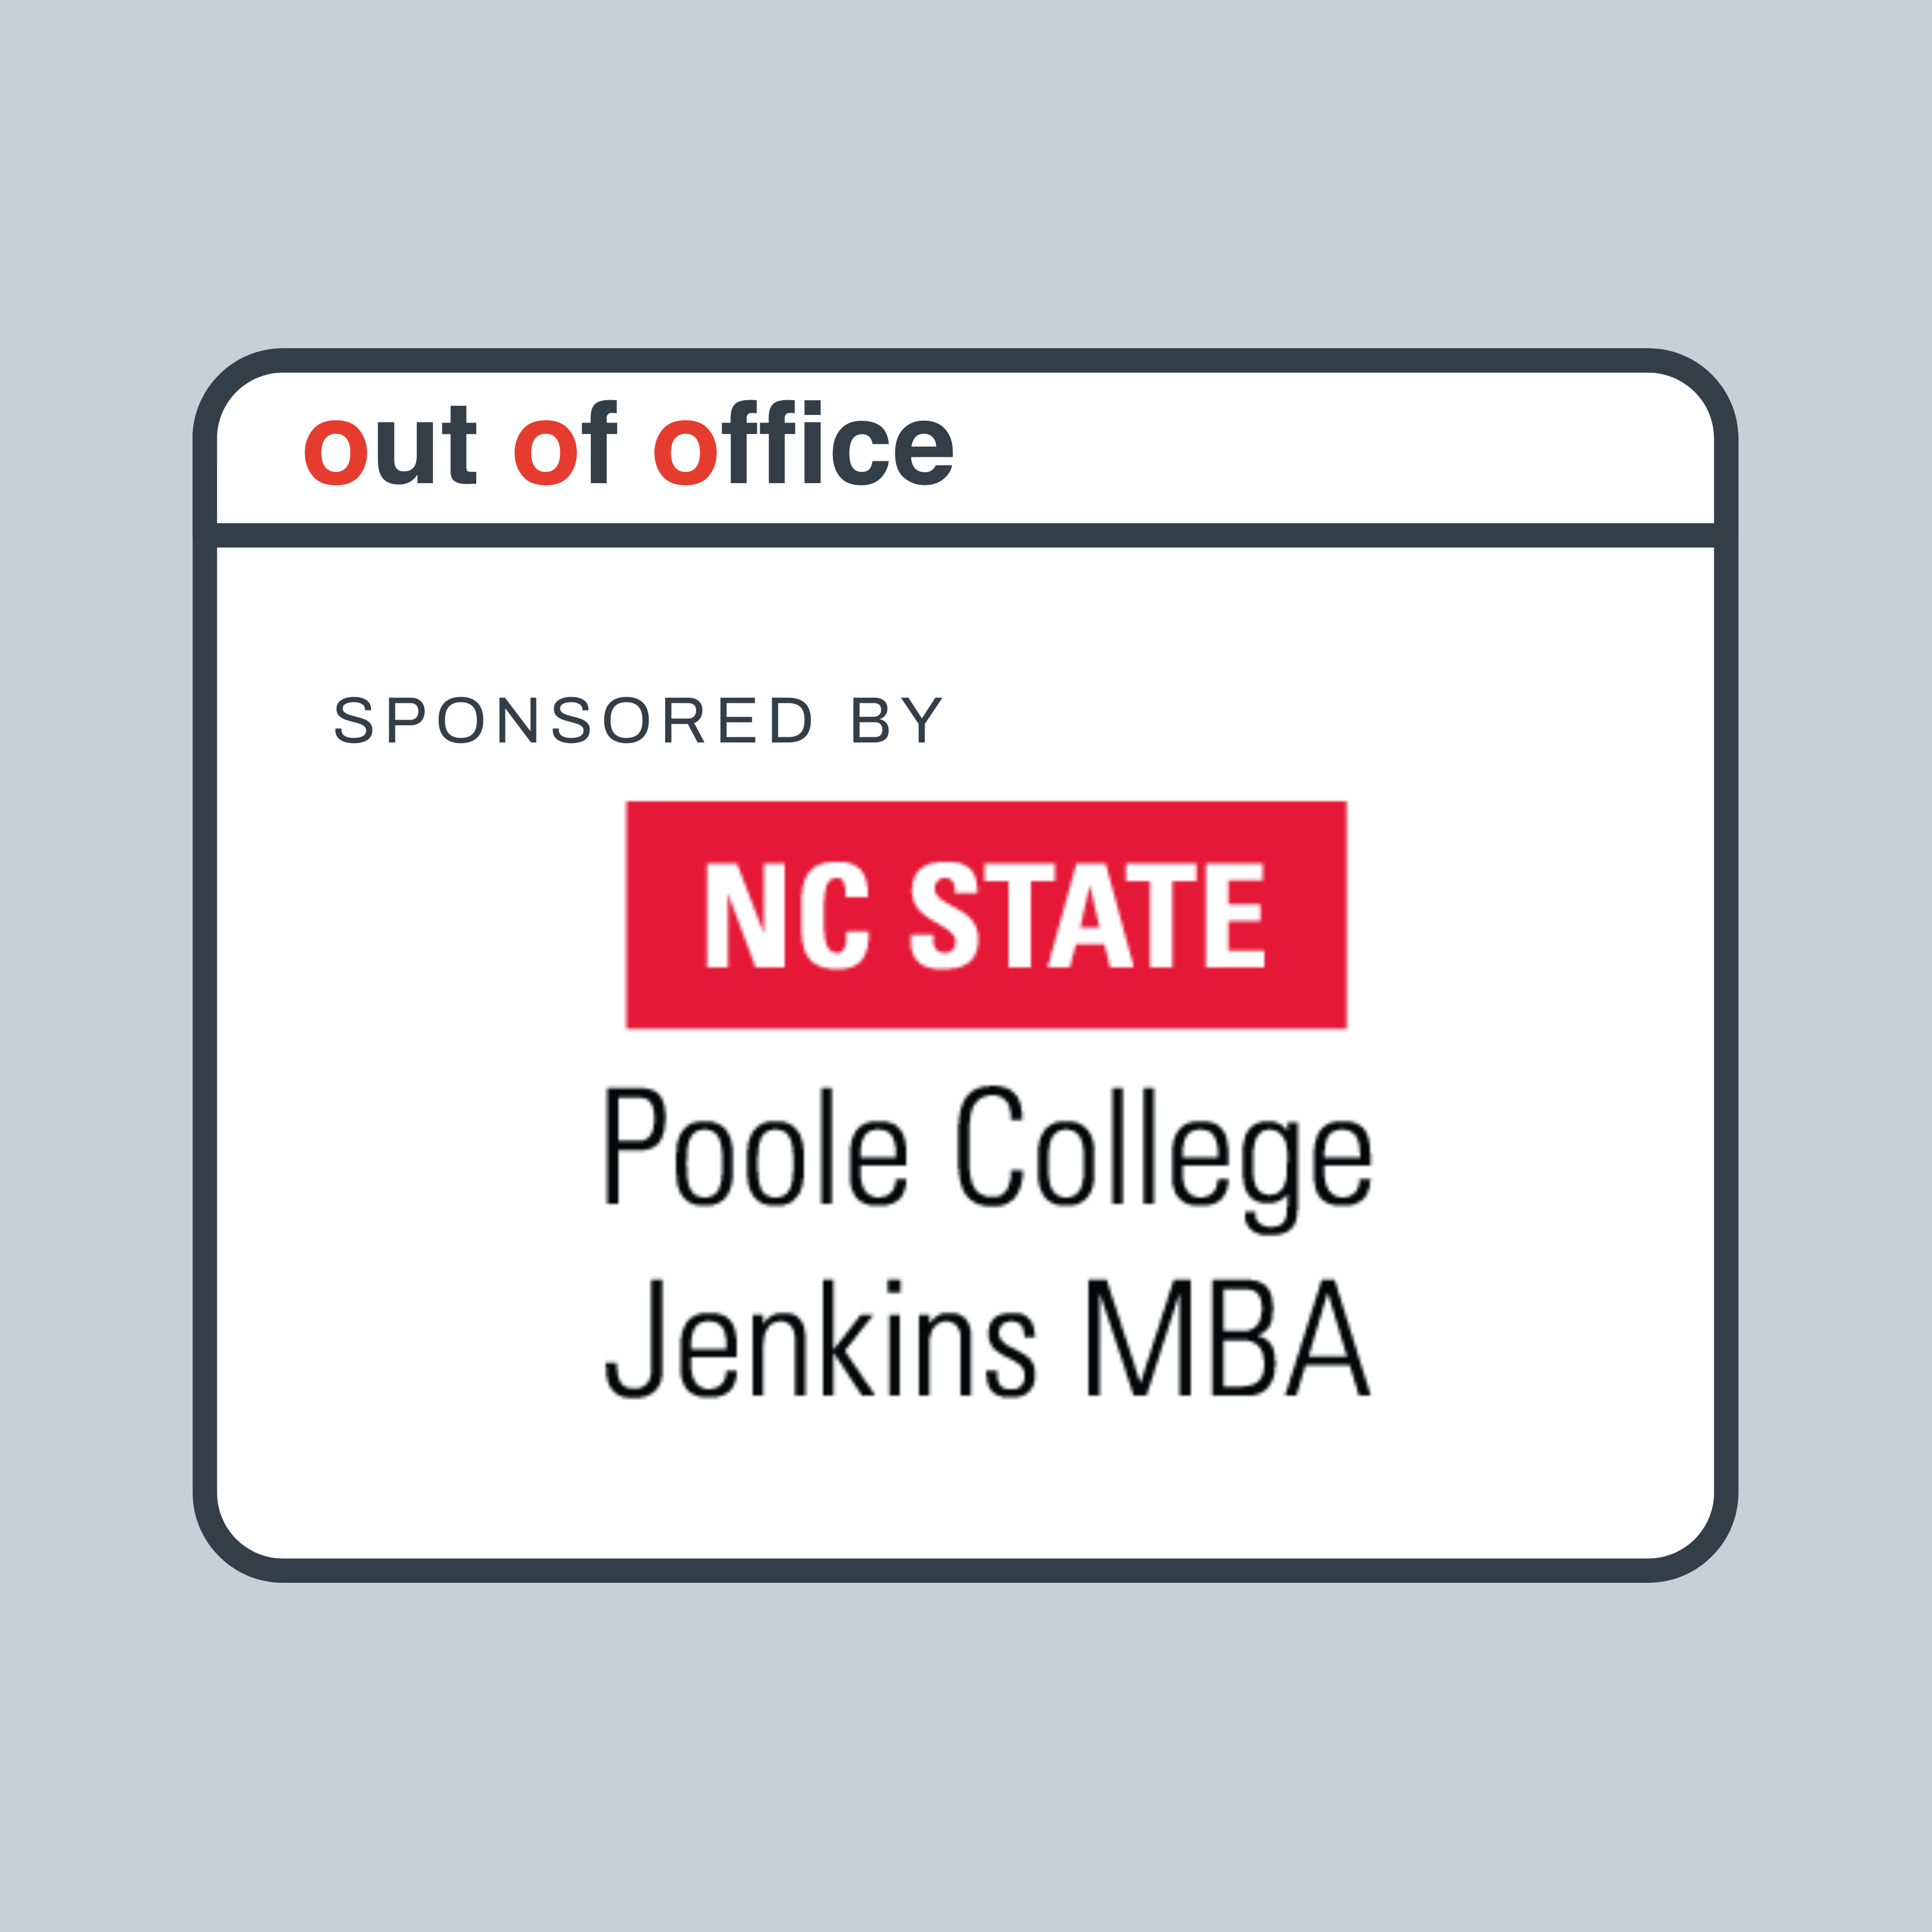 Out Of Office logo with sponsor's NC State Poole College and Jenkins MBA logo